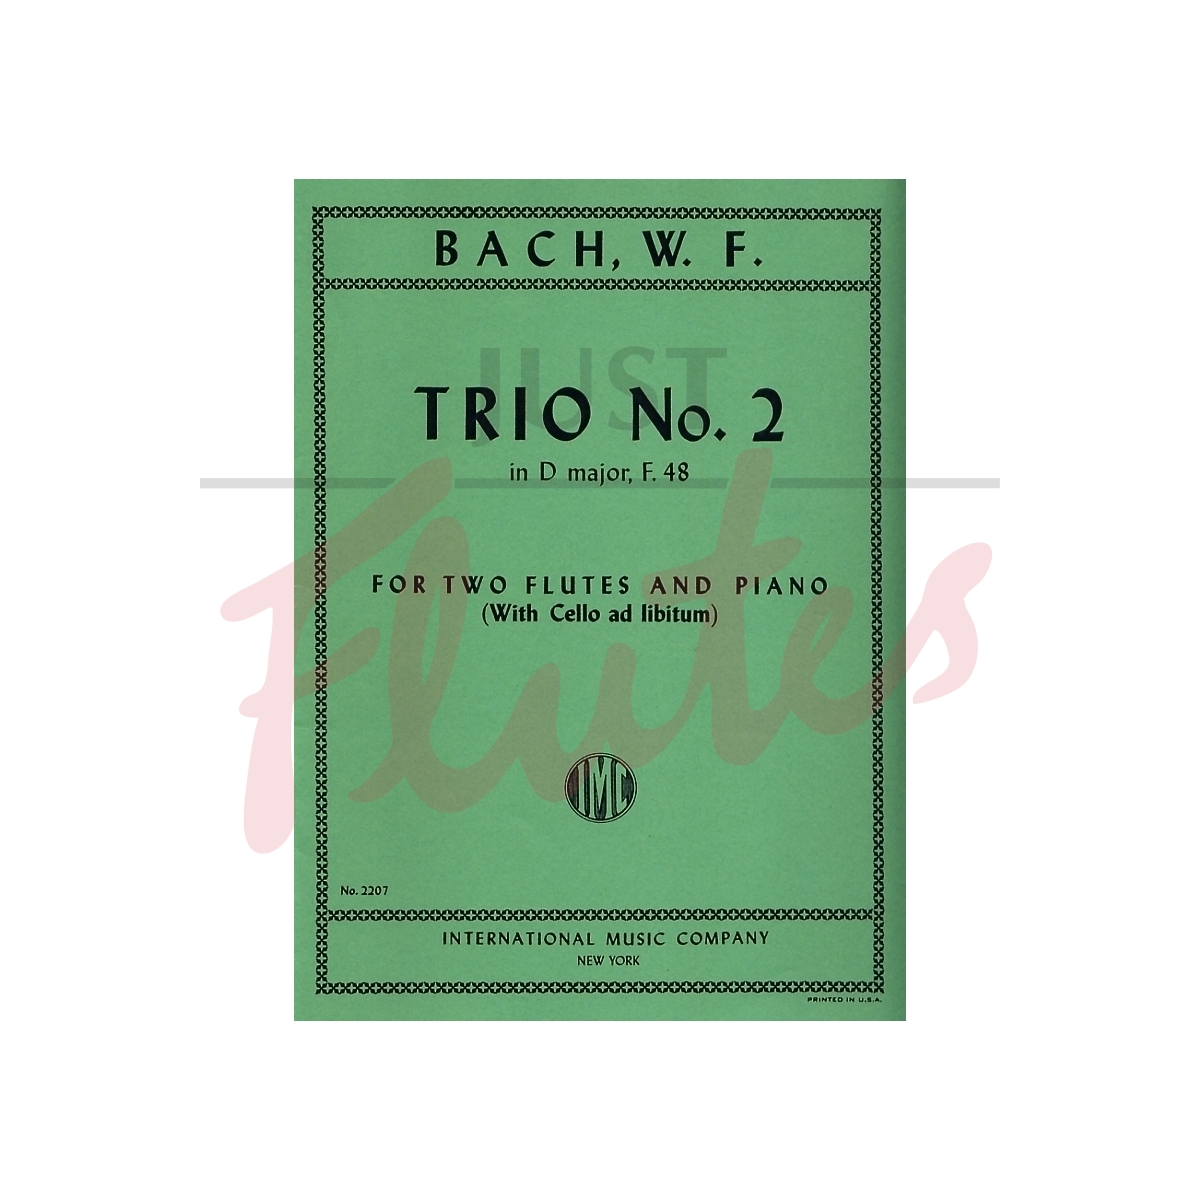 Trio No 2 in D major for Two Flutes and Piano